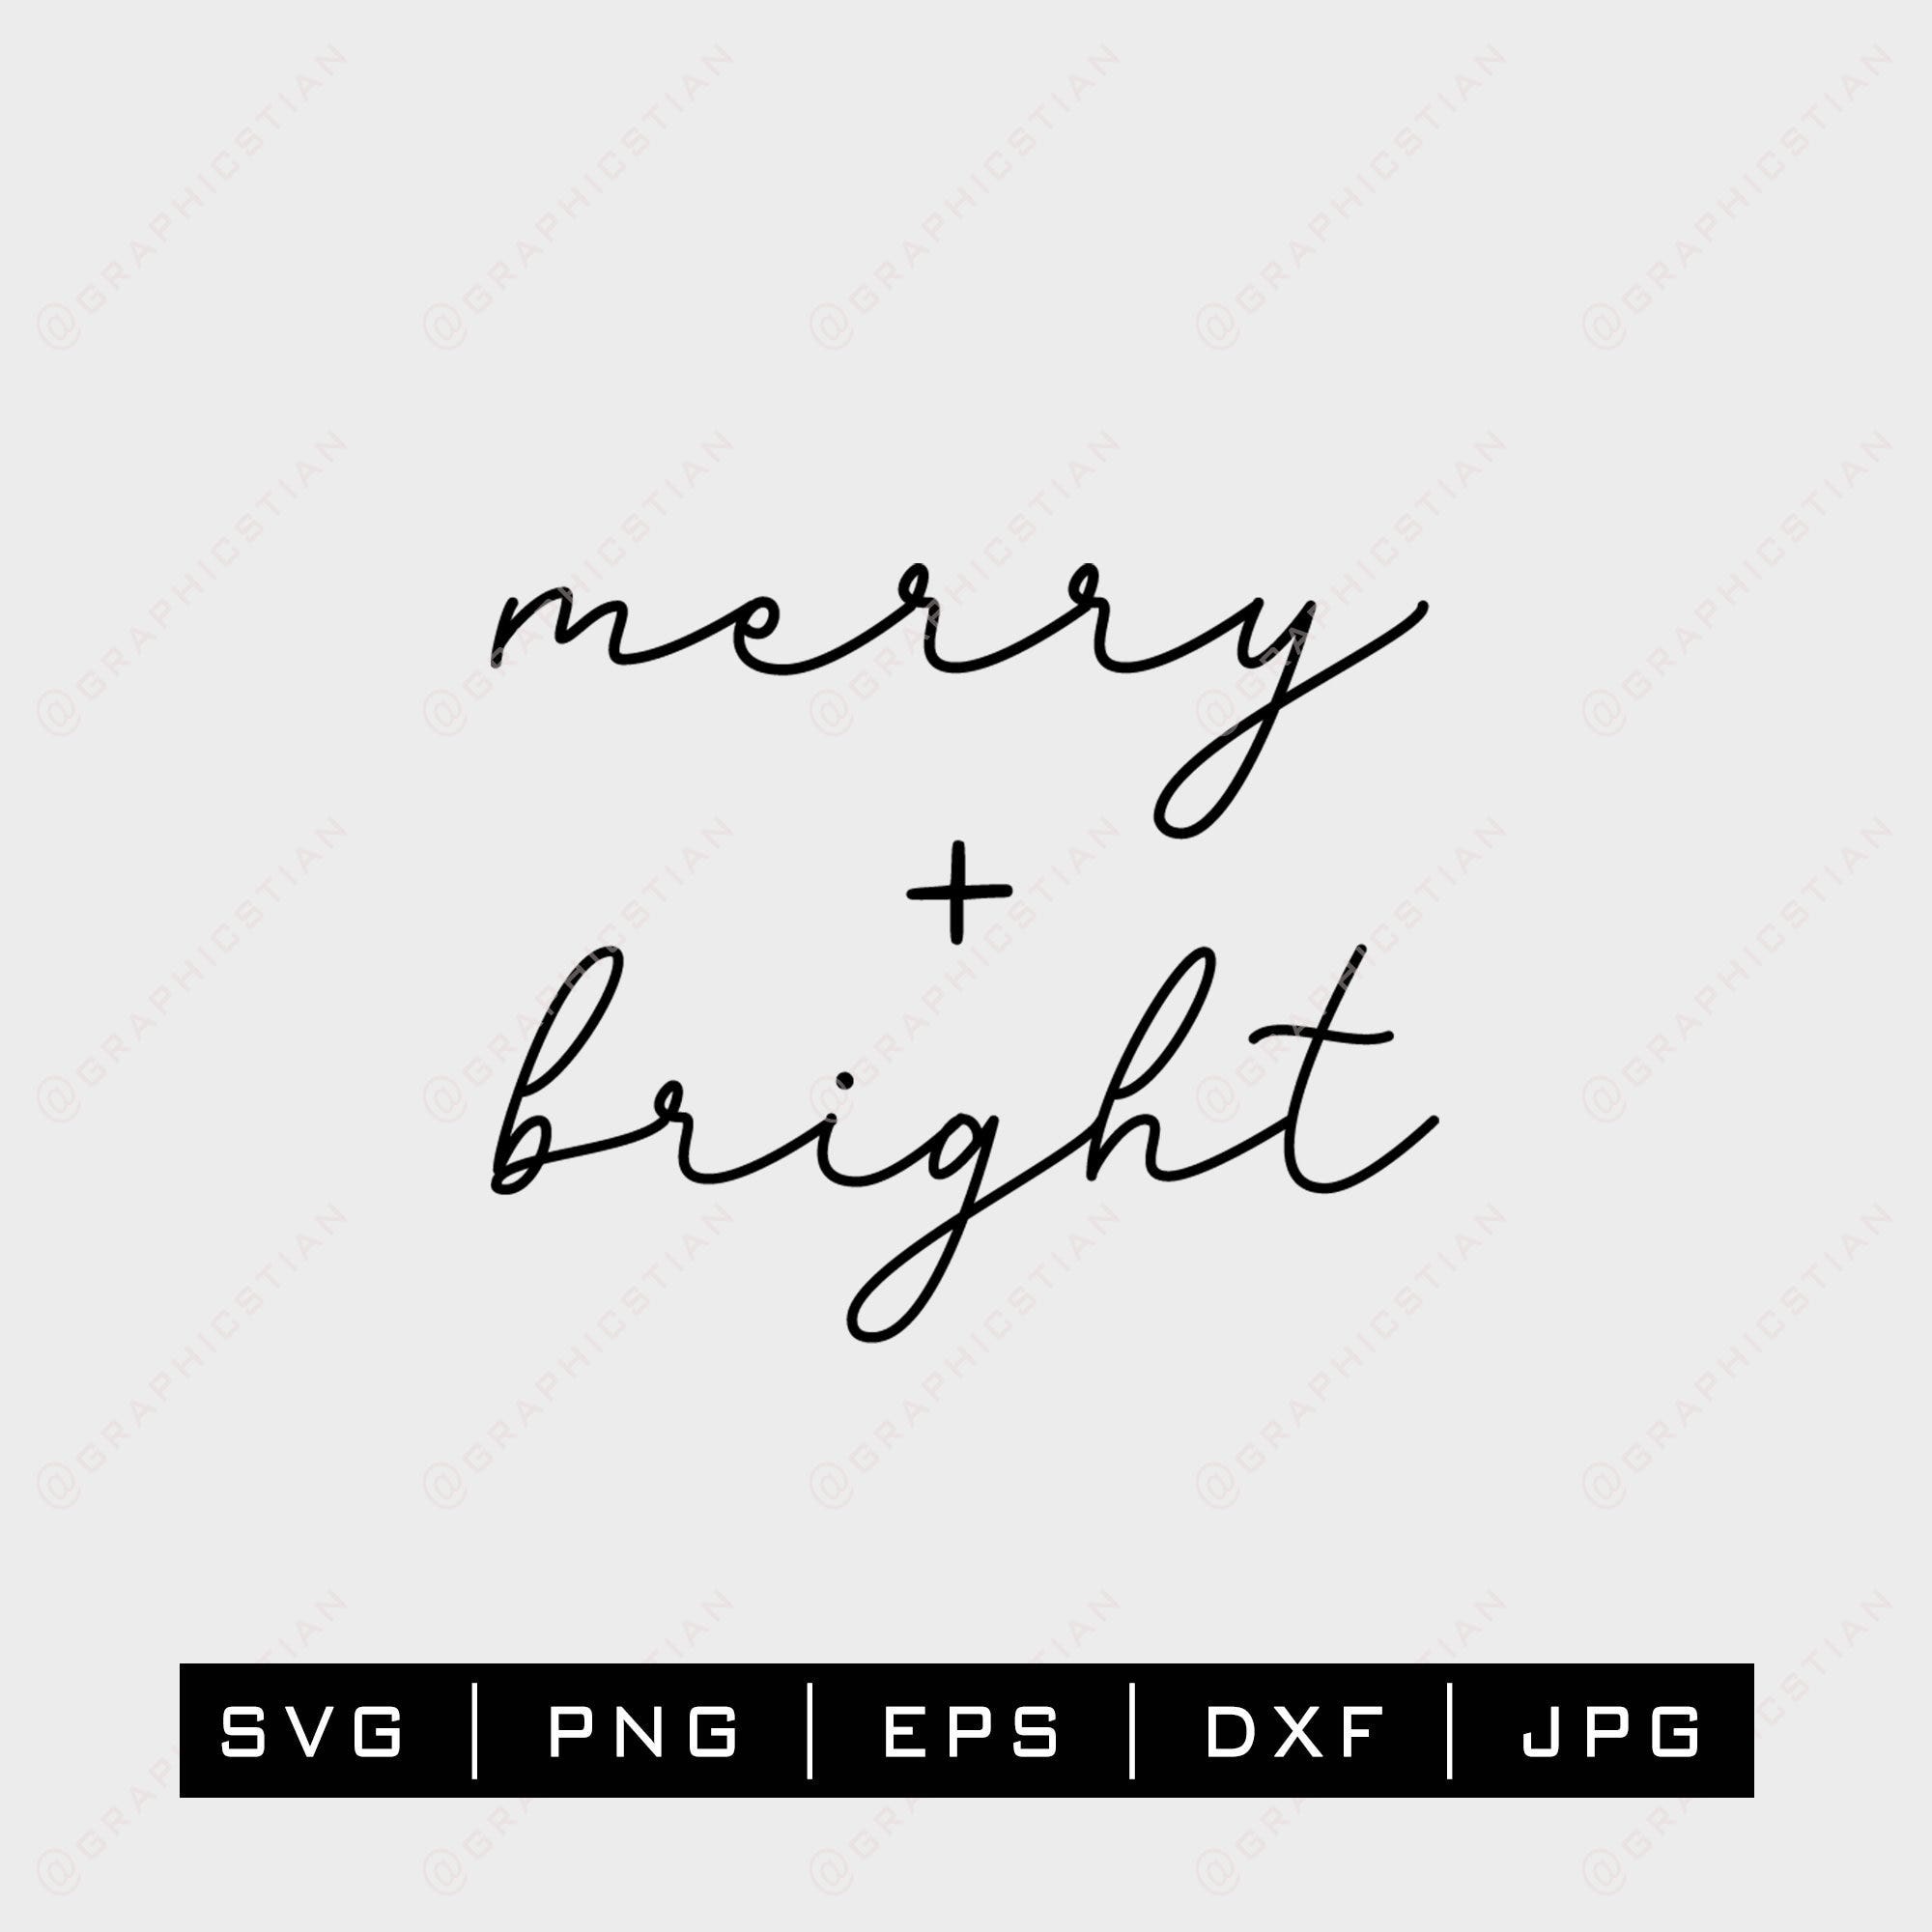 Merry + Bright SVG | Merry And Bright Svg  | Christmas Svg | Merry Christmas Svg | Christmas Sayings Svg | Svg files for Cricut